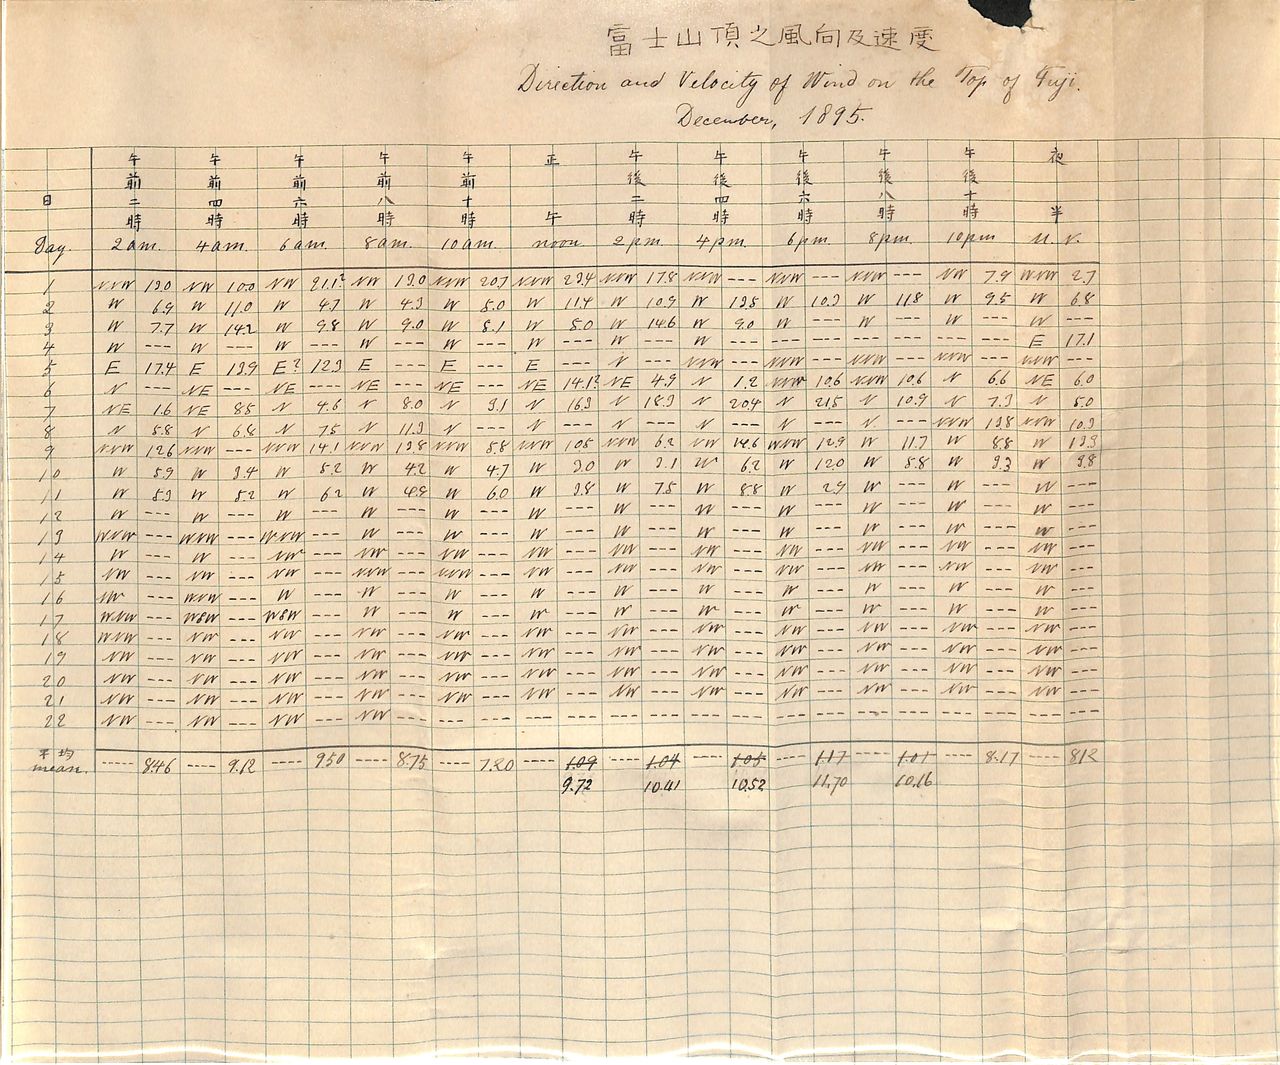 Weather readings made by Nonaka Itaru and Chiyoko. The last reading is for December 22, 1895, when they were compelled to leave the summit. (Photo courtesy of the Nonaka Itaru and Chiyoko Digital Archive. The original document belongs to their grandson, Nonaka Masaru.)